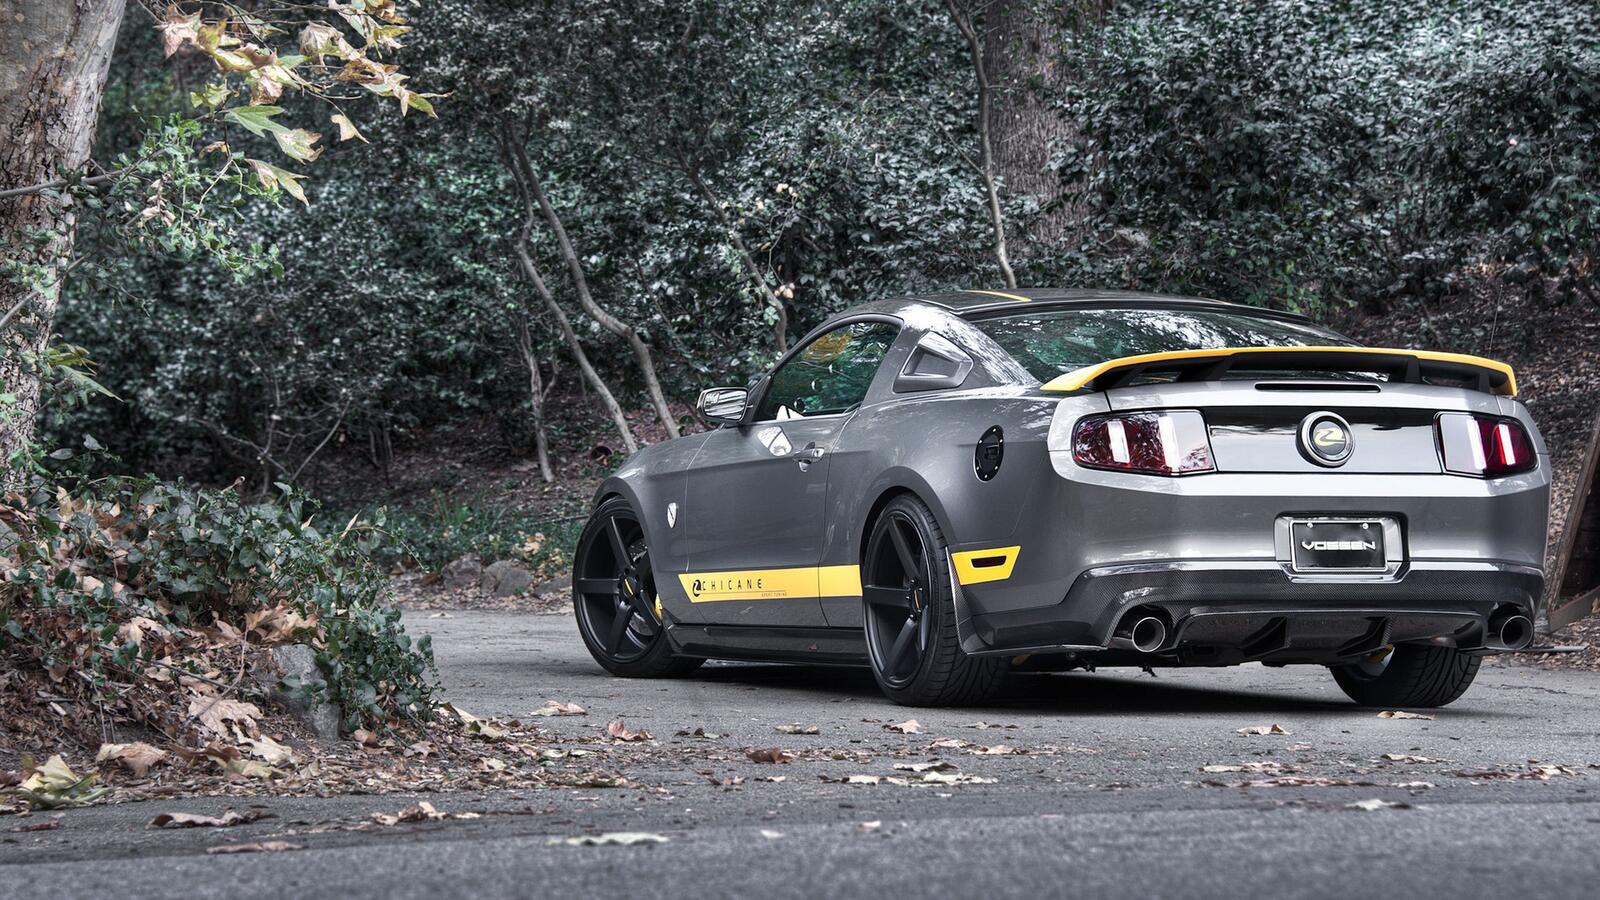 Wallpapers Ford Mustang Rear on the desktop